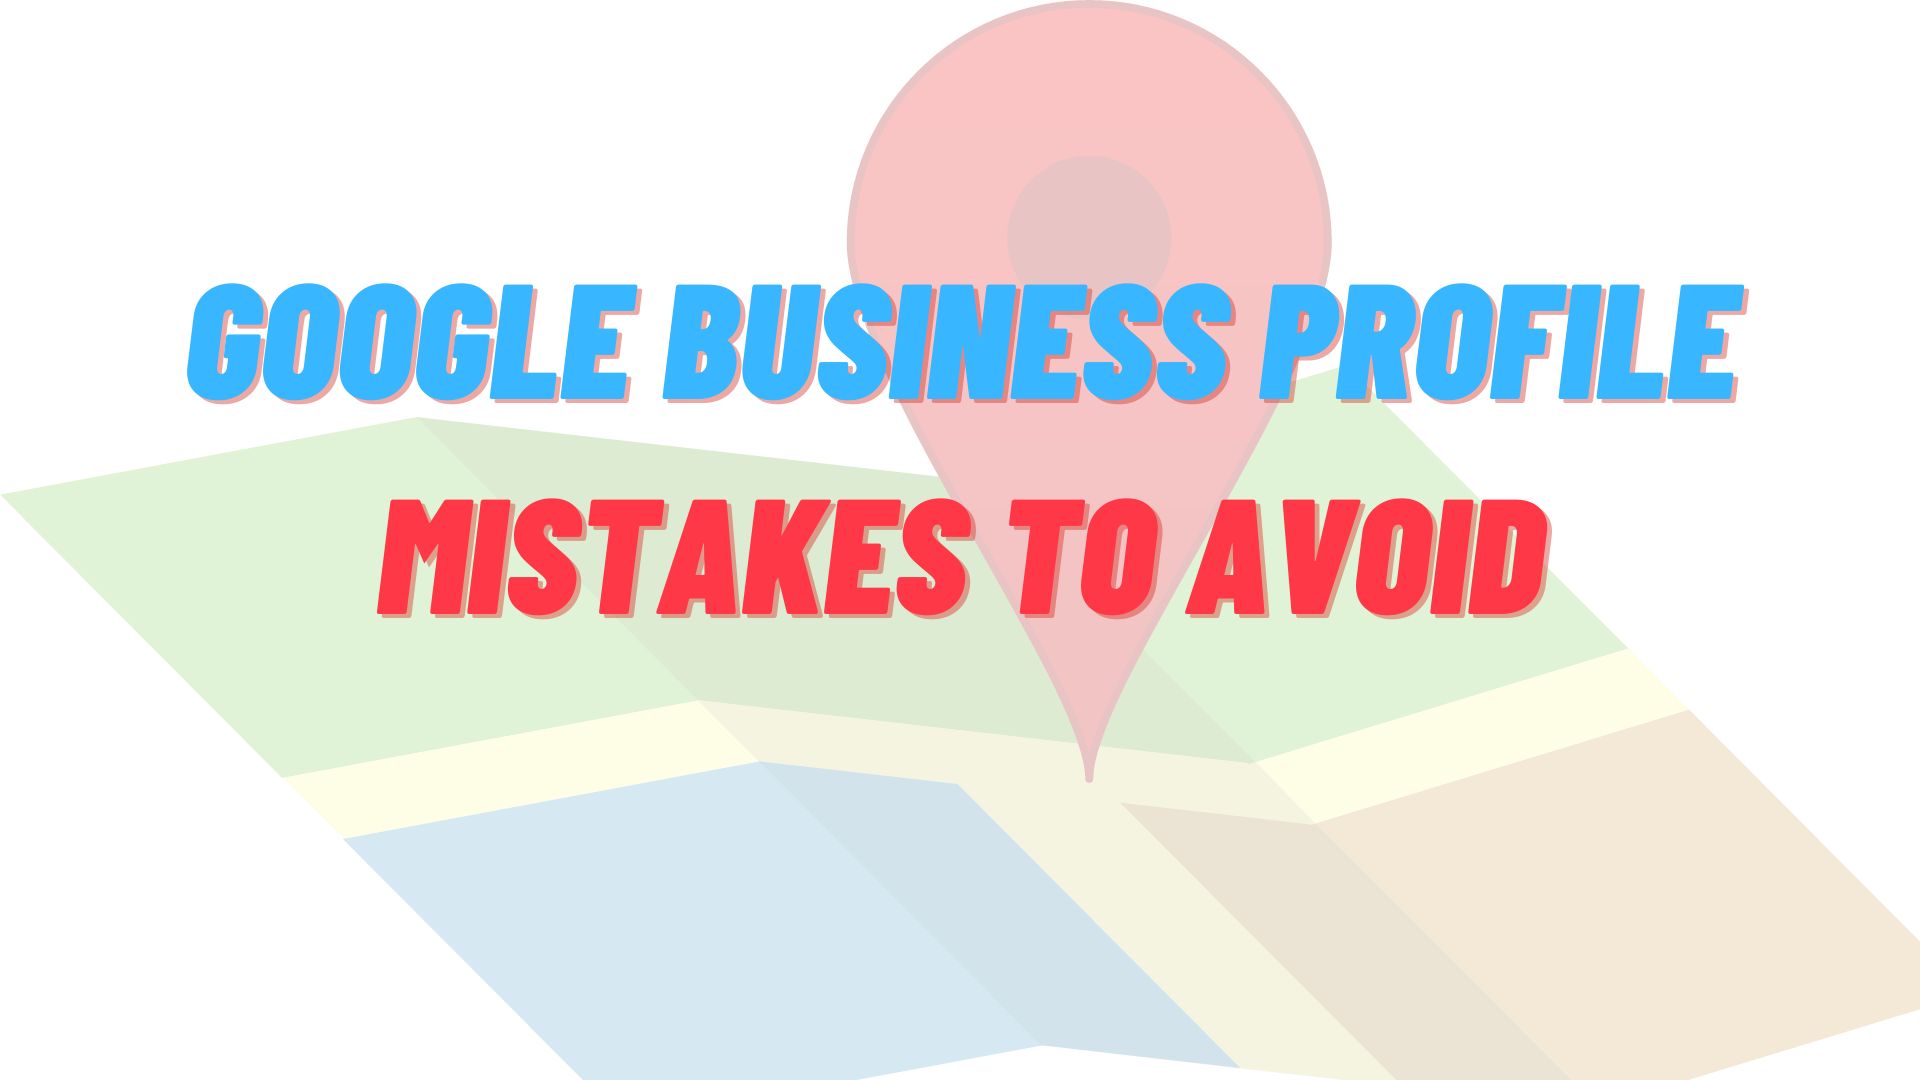 Common Google Business Profile Mistakes to Avoid